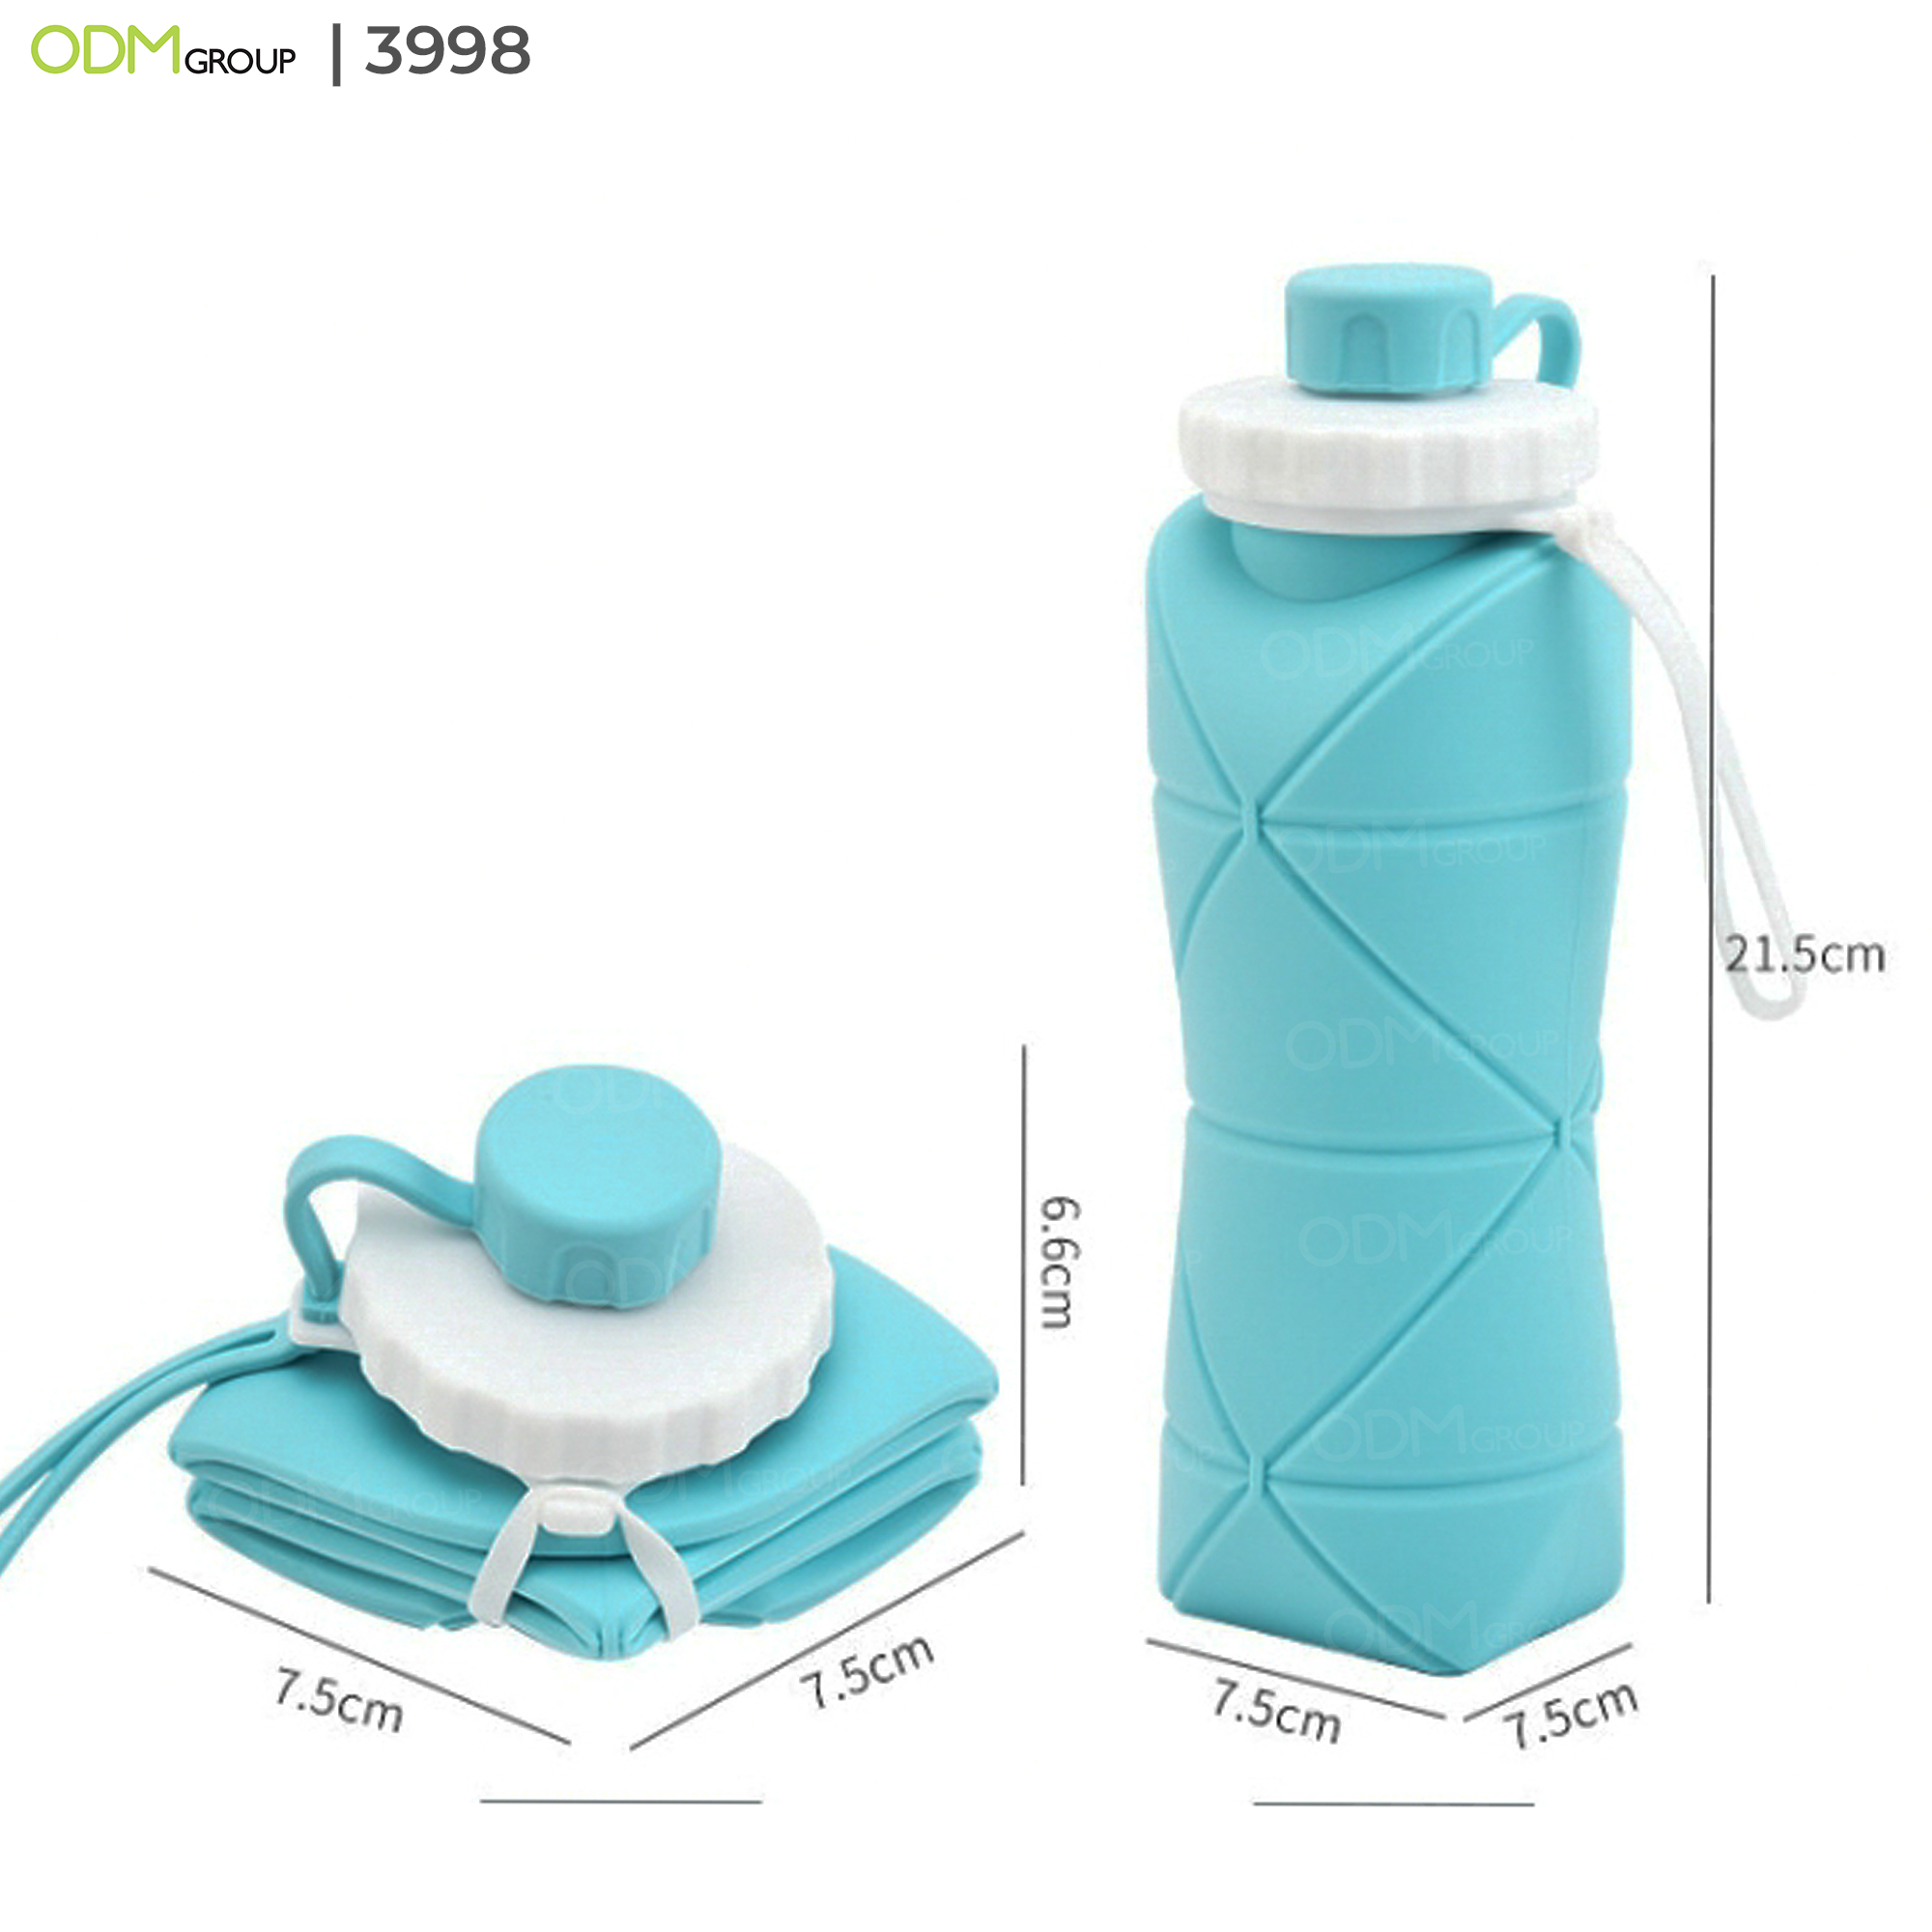 https://www.theodmgroup.com/wp-content/uploads/2022/05/Creative-Water-Bottle-Designs-2.png